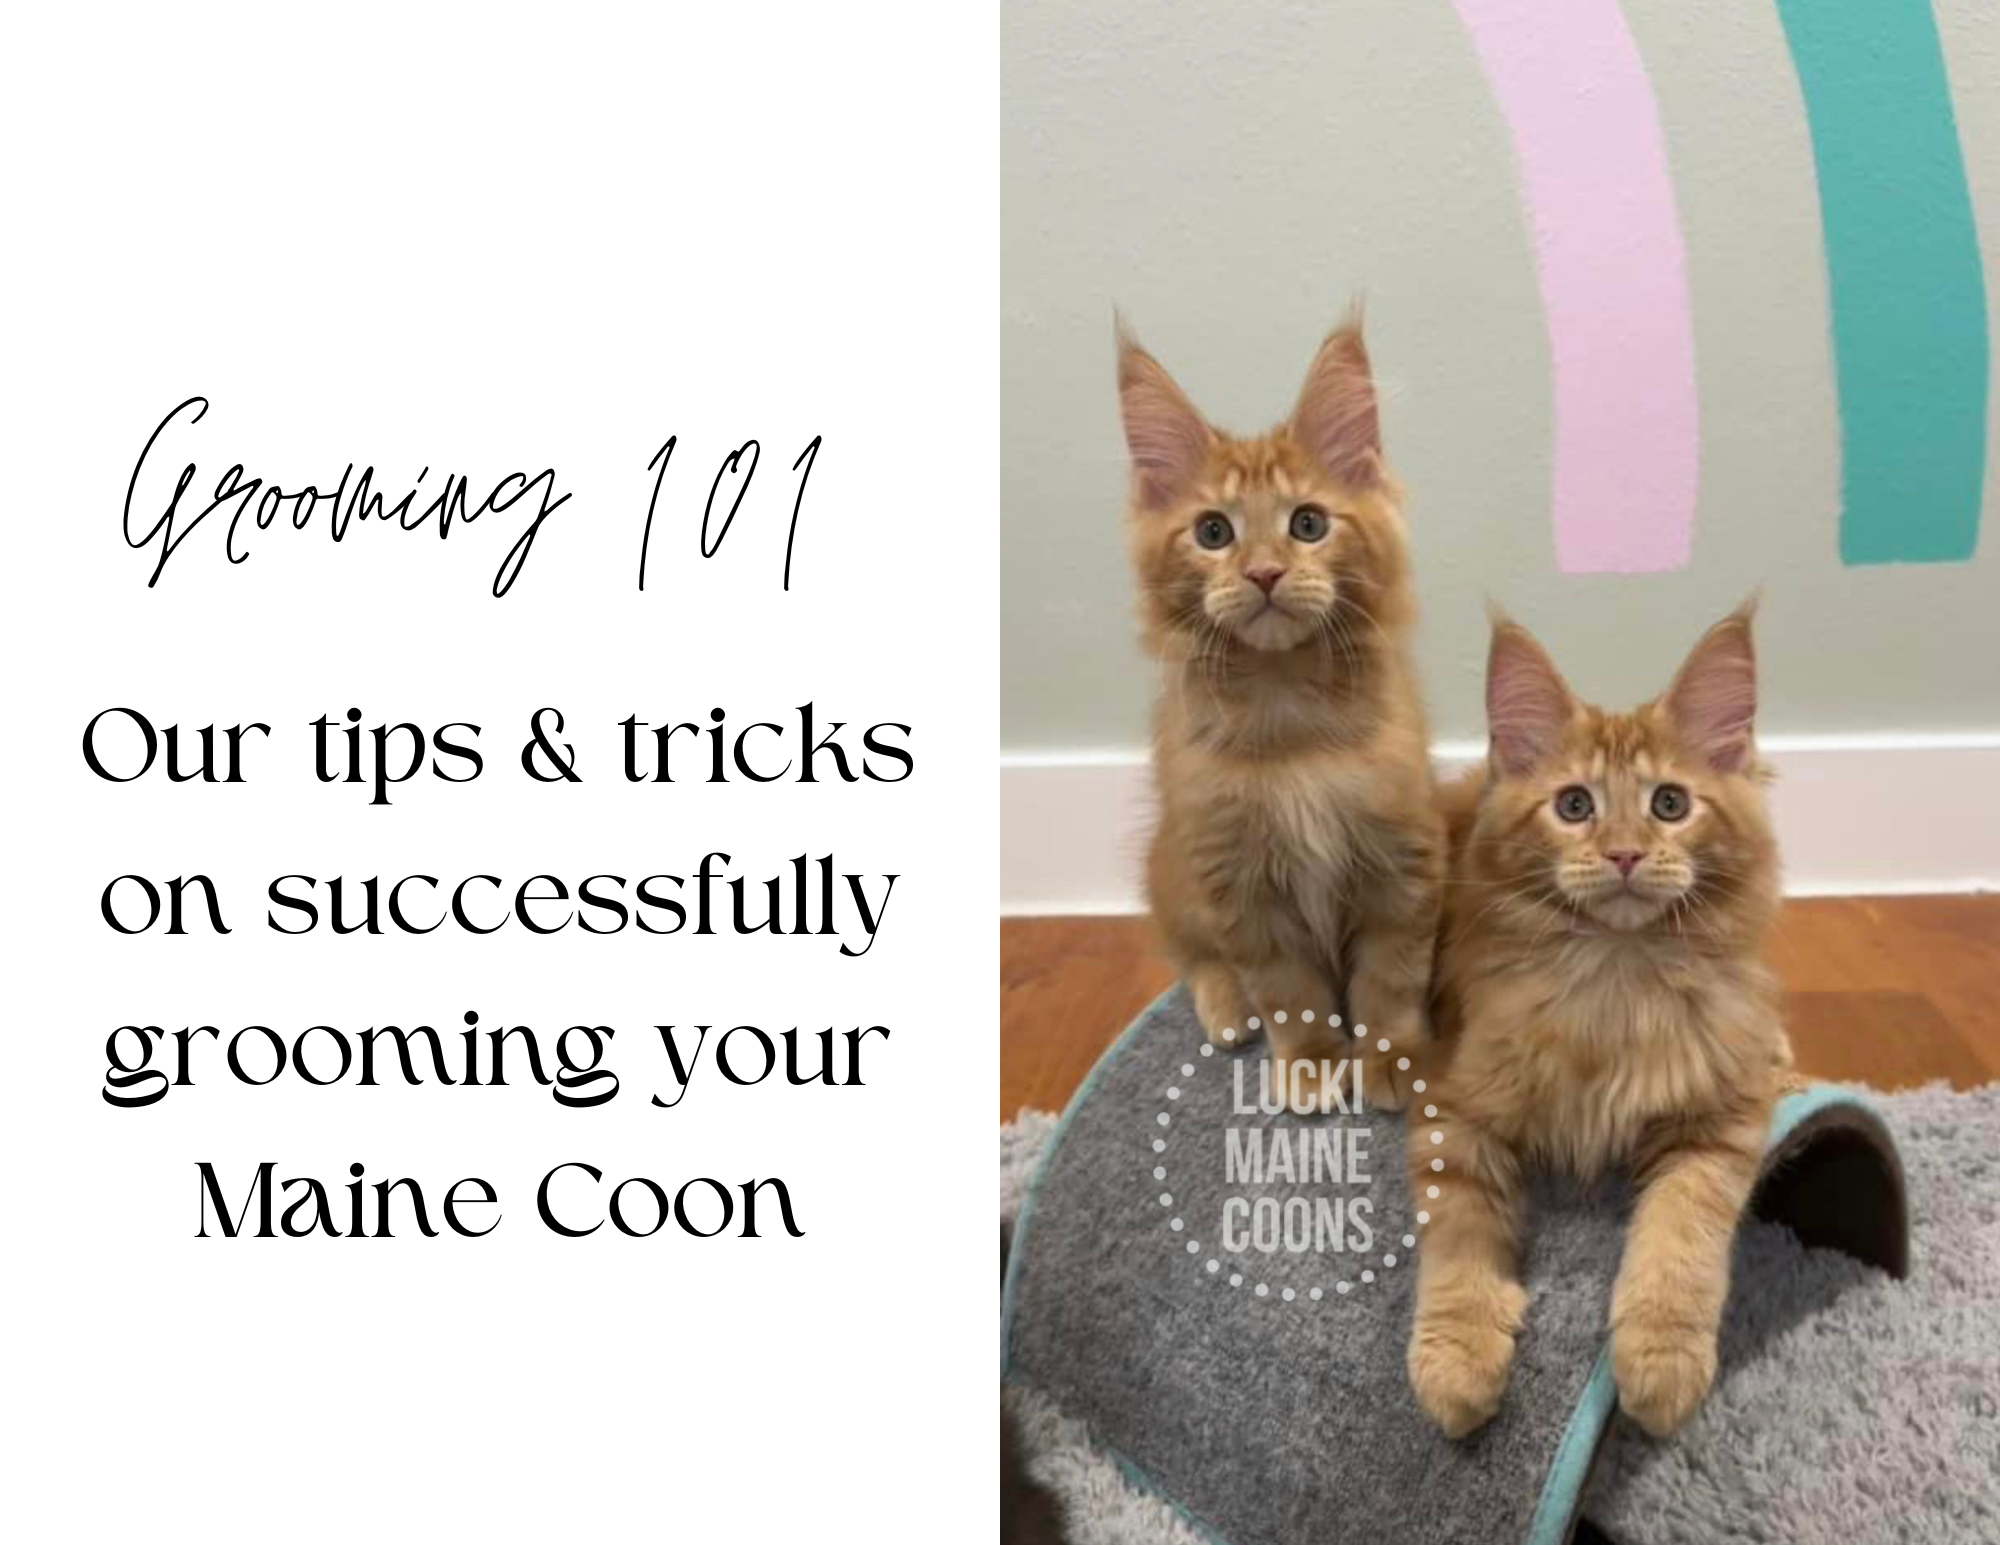 Grooming a Maine Coon